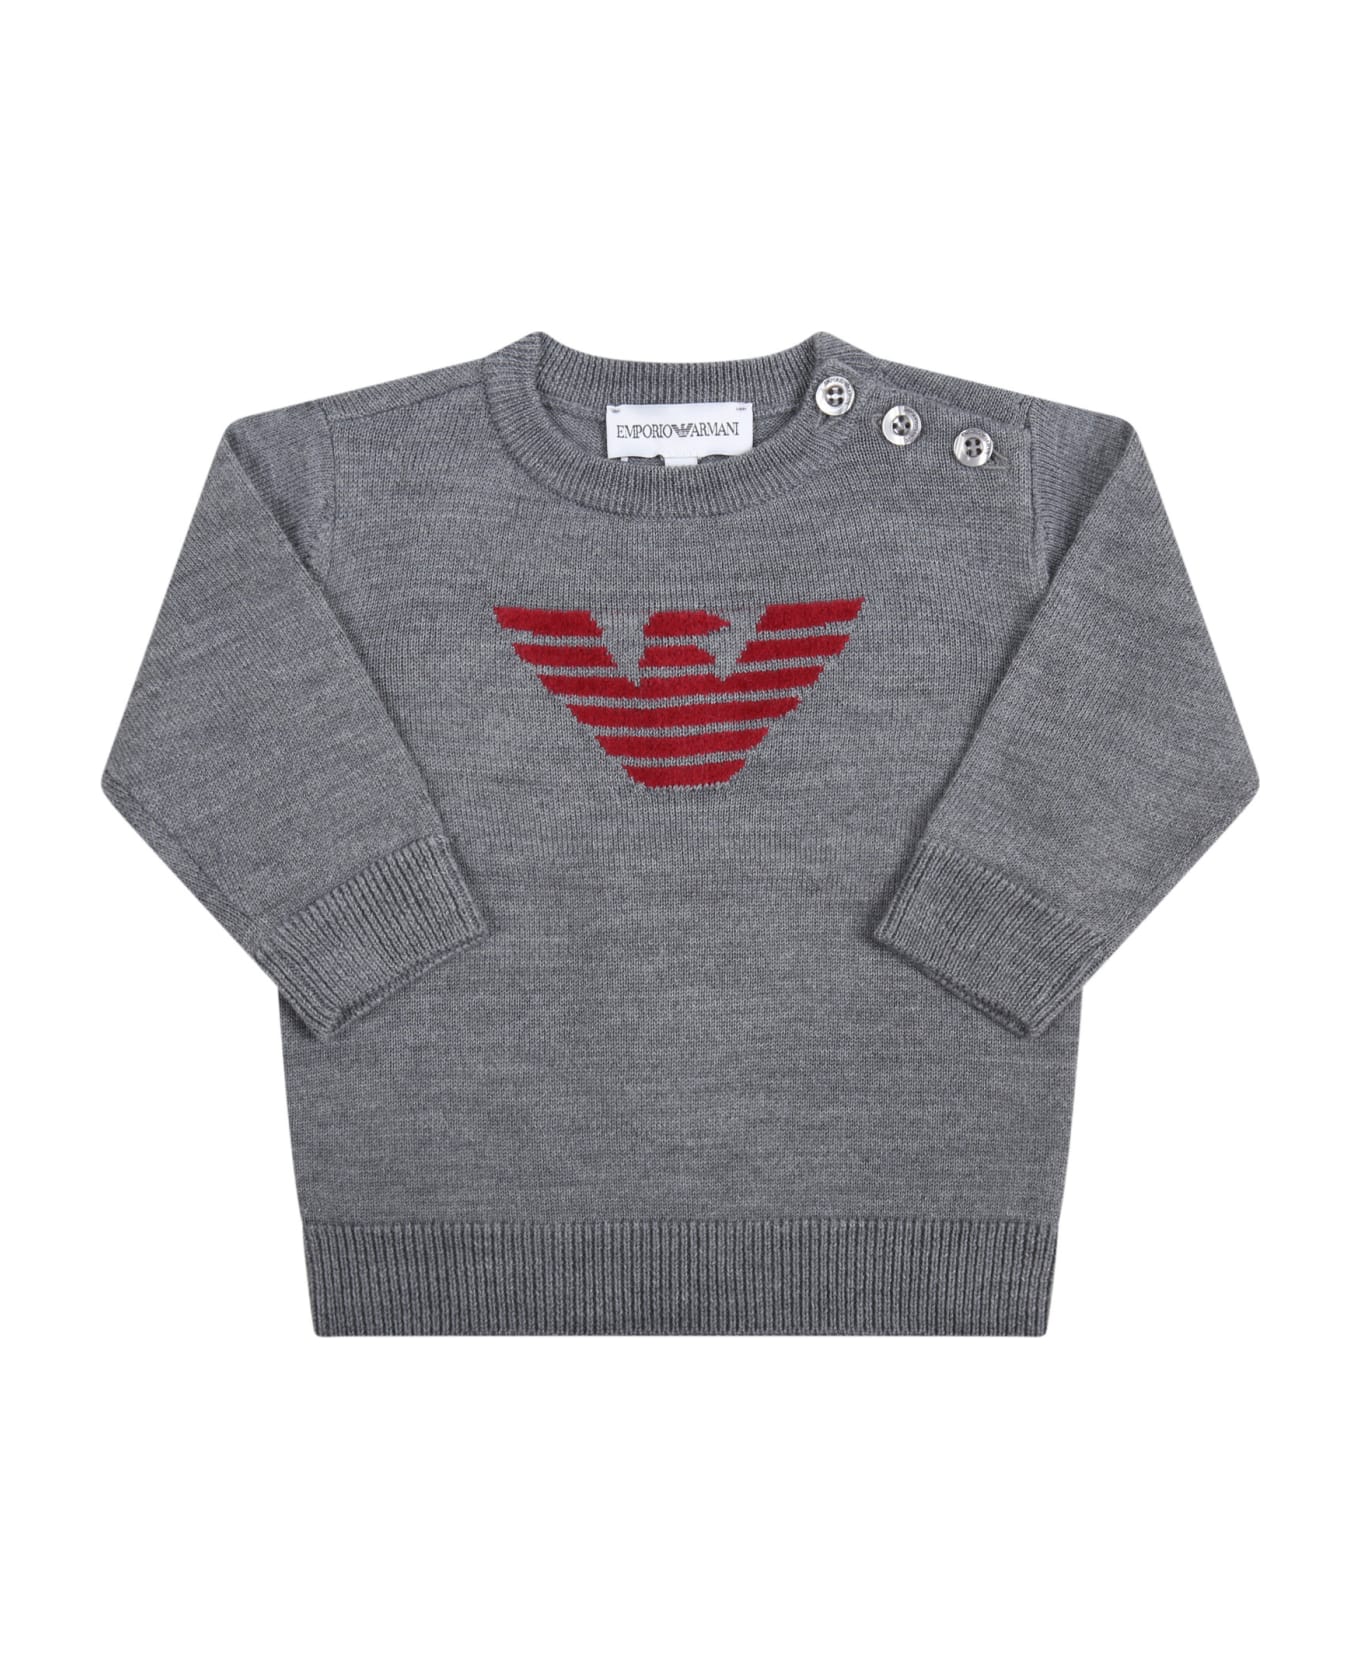 Armani embroidered Collezioni Grey Sweater For Baby Boy With Eagle - Grey